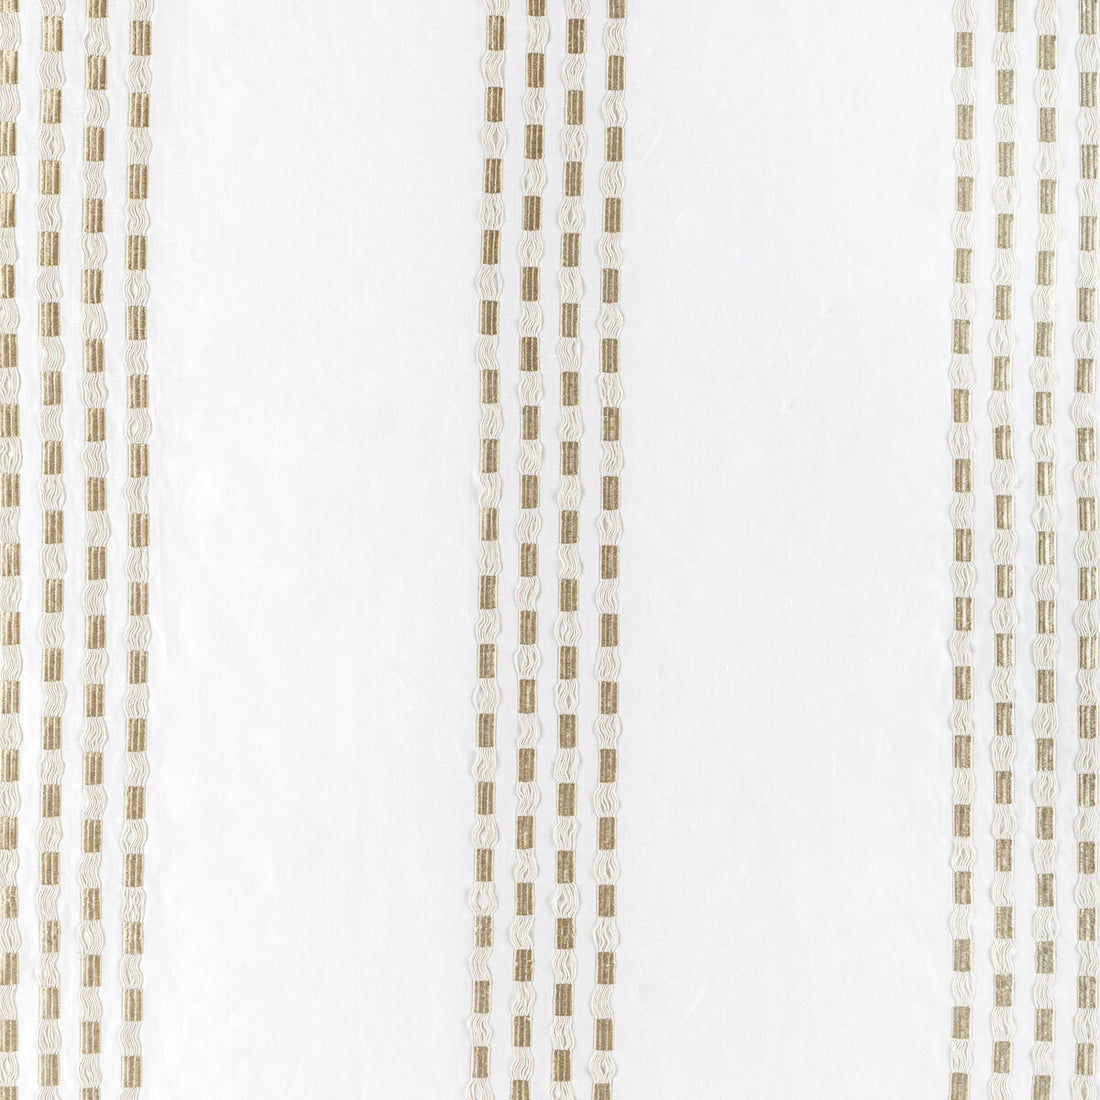 Linear Effect fabric in champagne color - pattern 36354.16.0 - by Kravet Couture in the Modern Luxe III collection